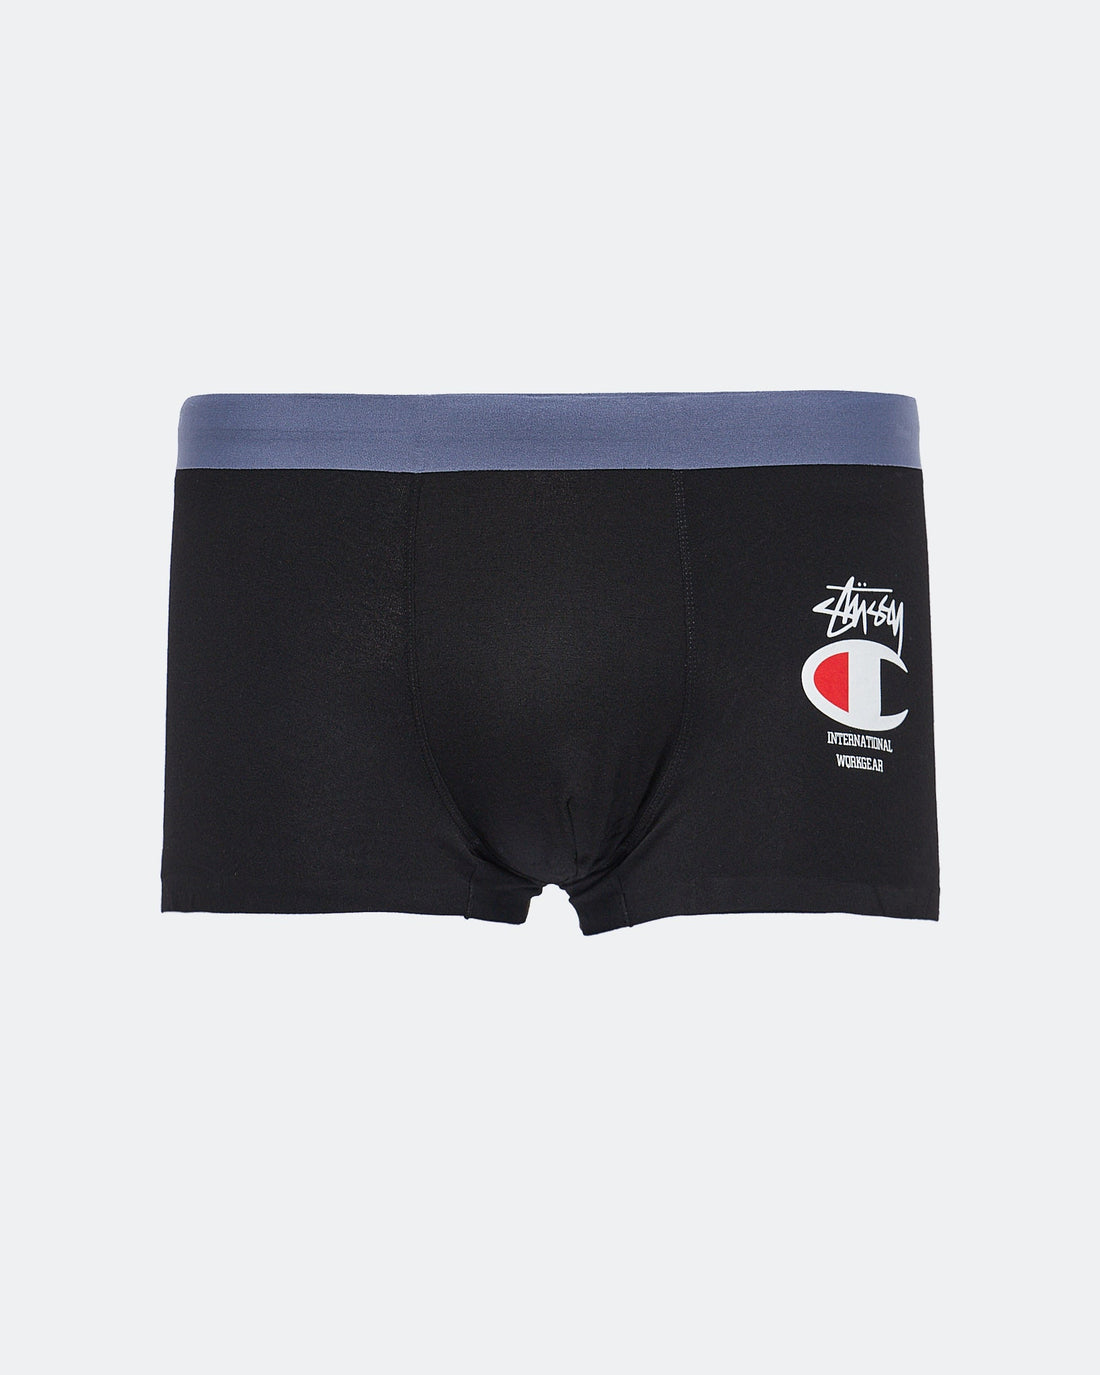 MOI OUTFIT-Champion Printed Men Underwear 5.90